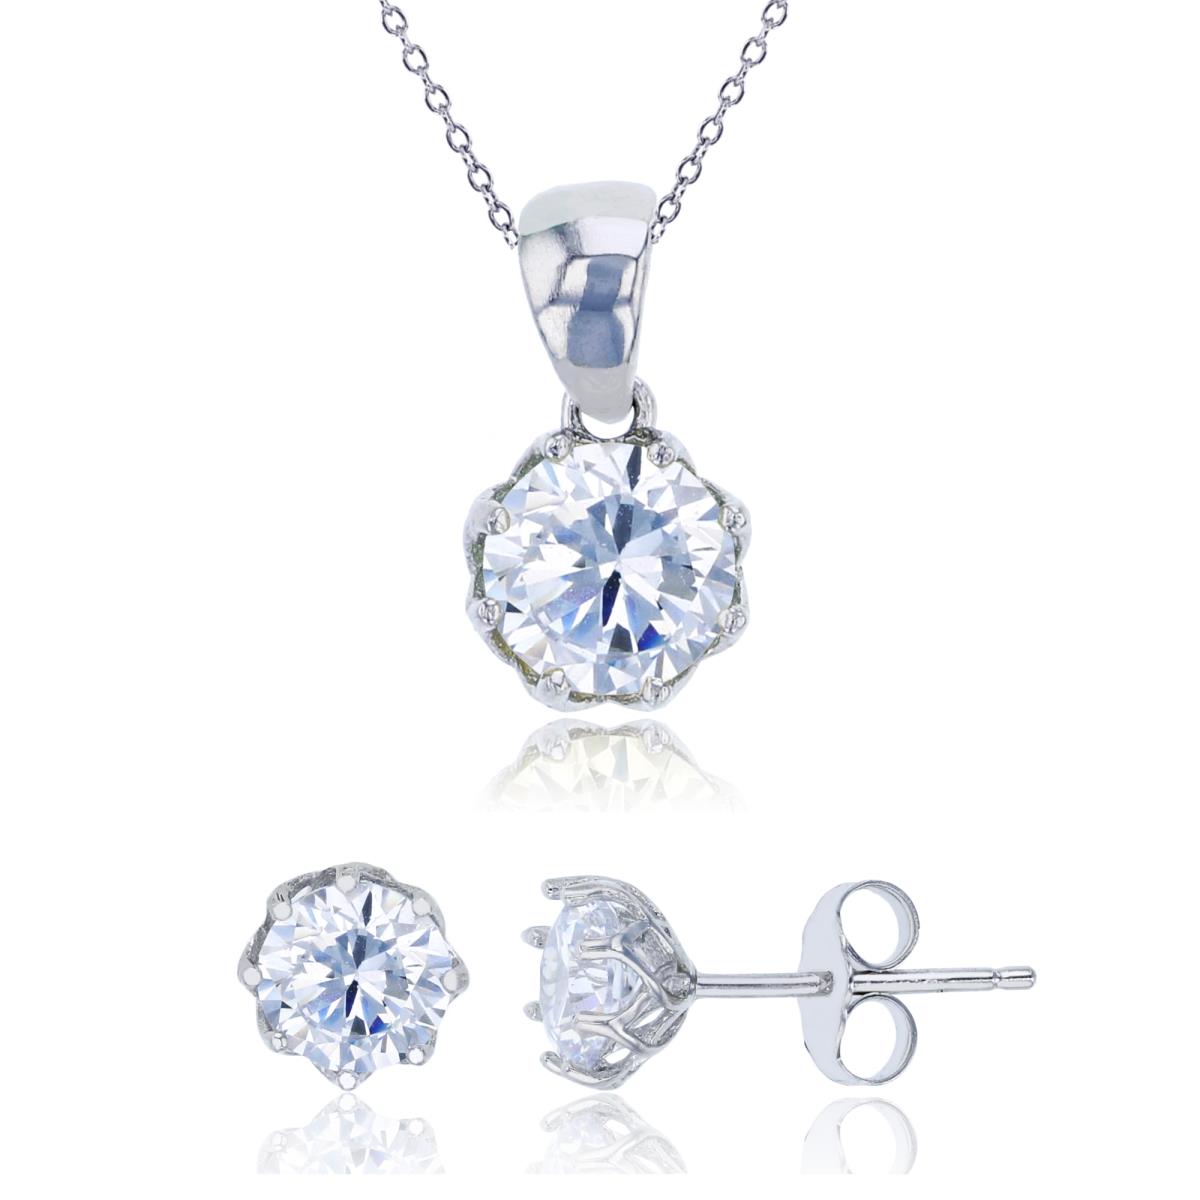 Sterling Silver Rhodium 6mm White Round Cut CZ Solitaire Dangling 18" Necklace & Earring Set